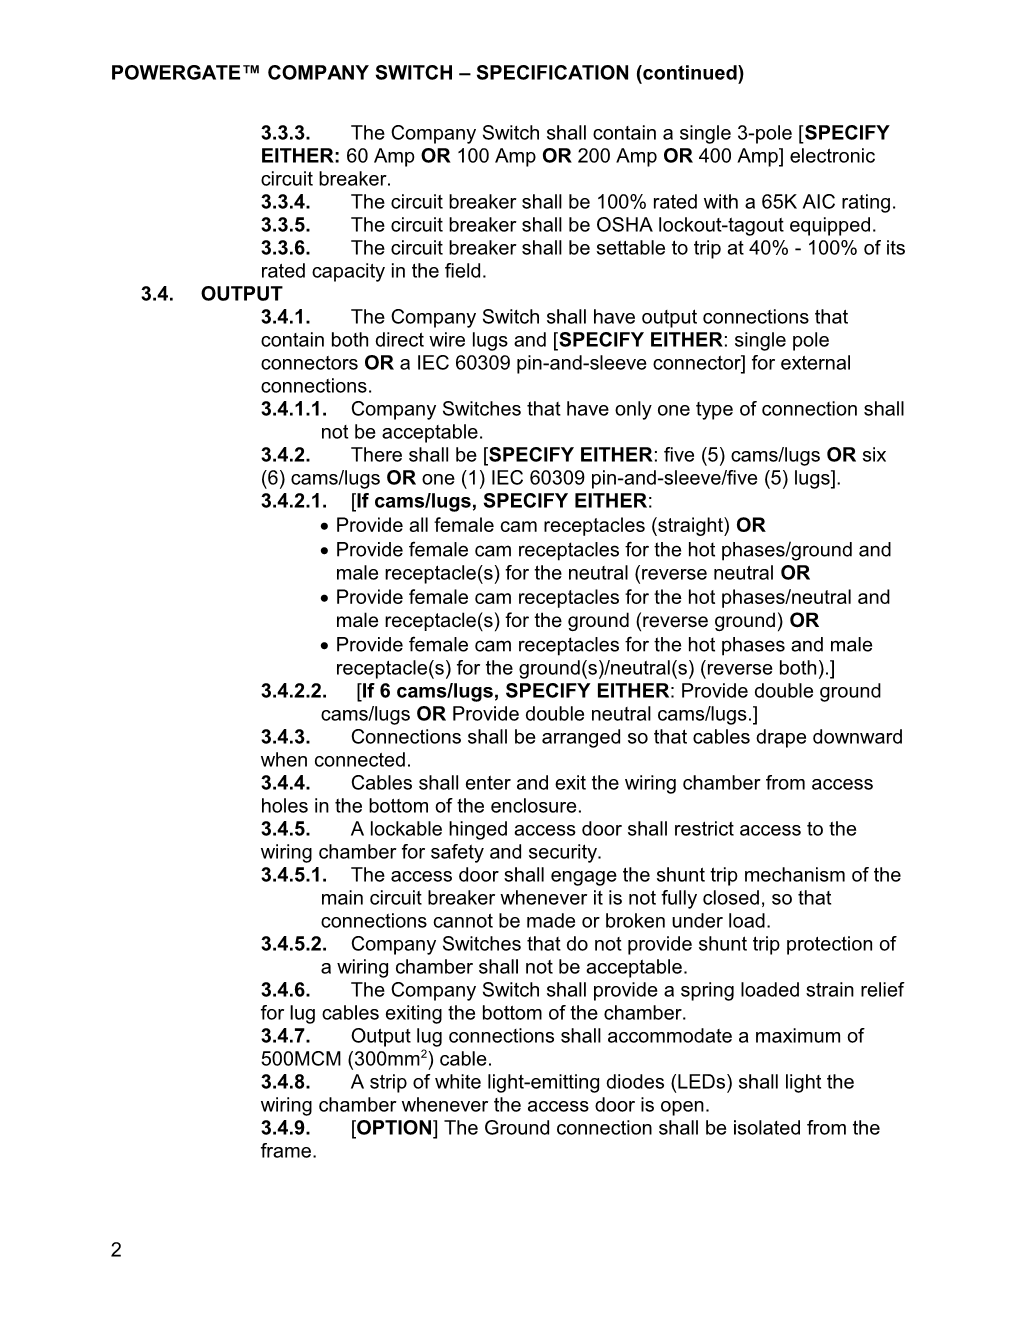 POWERGATE COMPANY SWITCH SPECIFICATION (Continued)